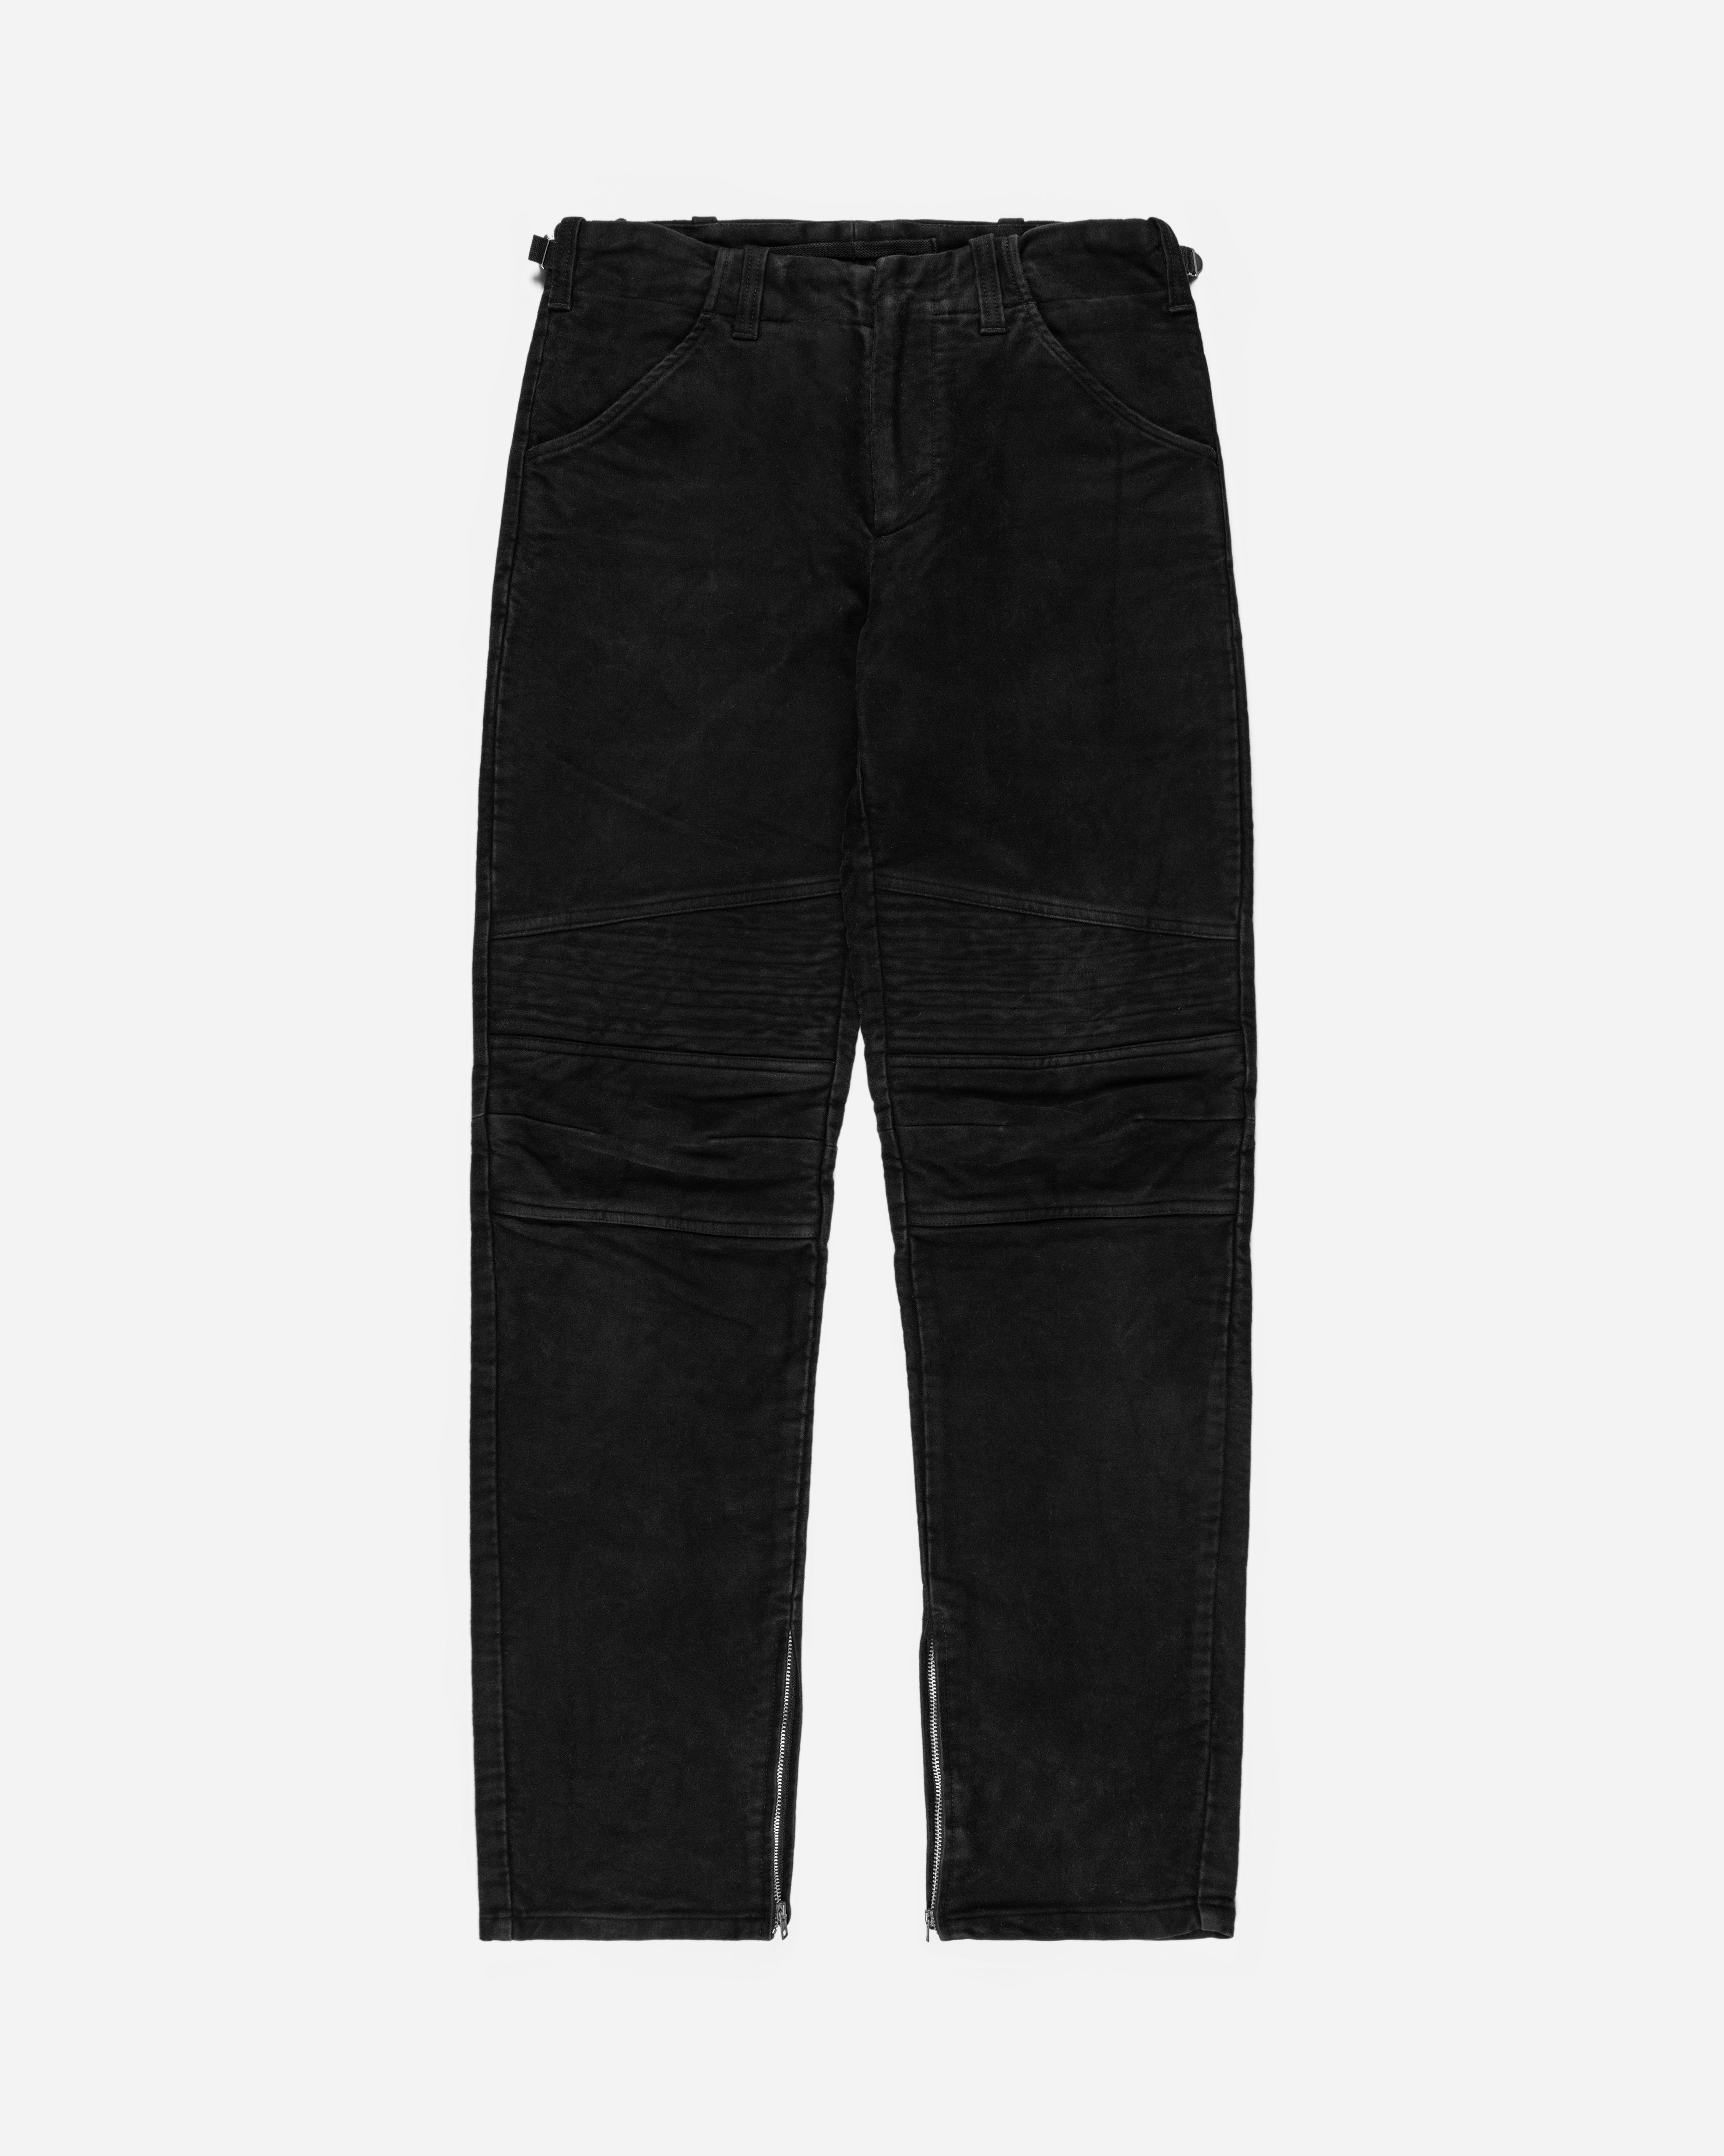 HELMUT LANG Stretch-leather flared pants | THE OUTNET